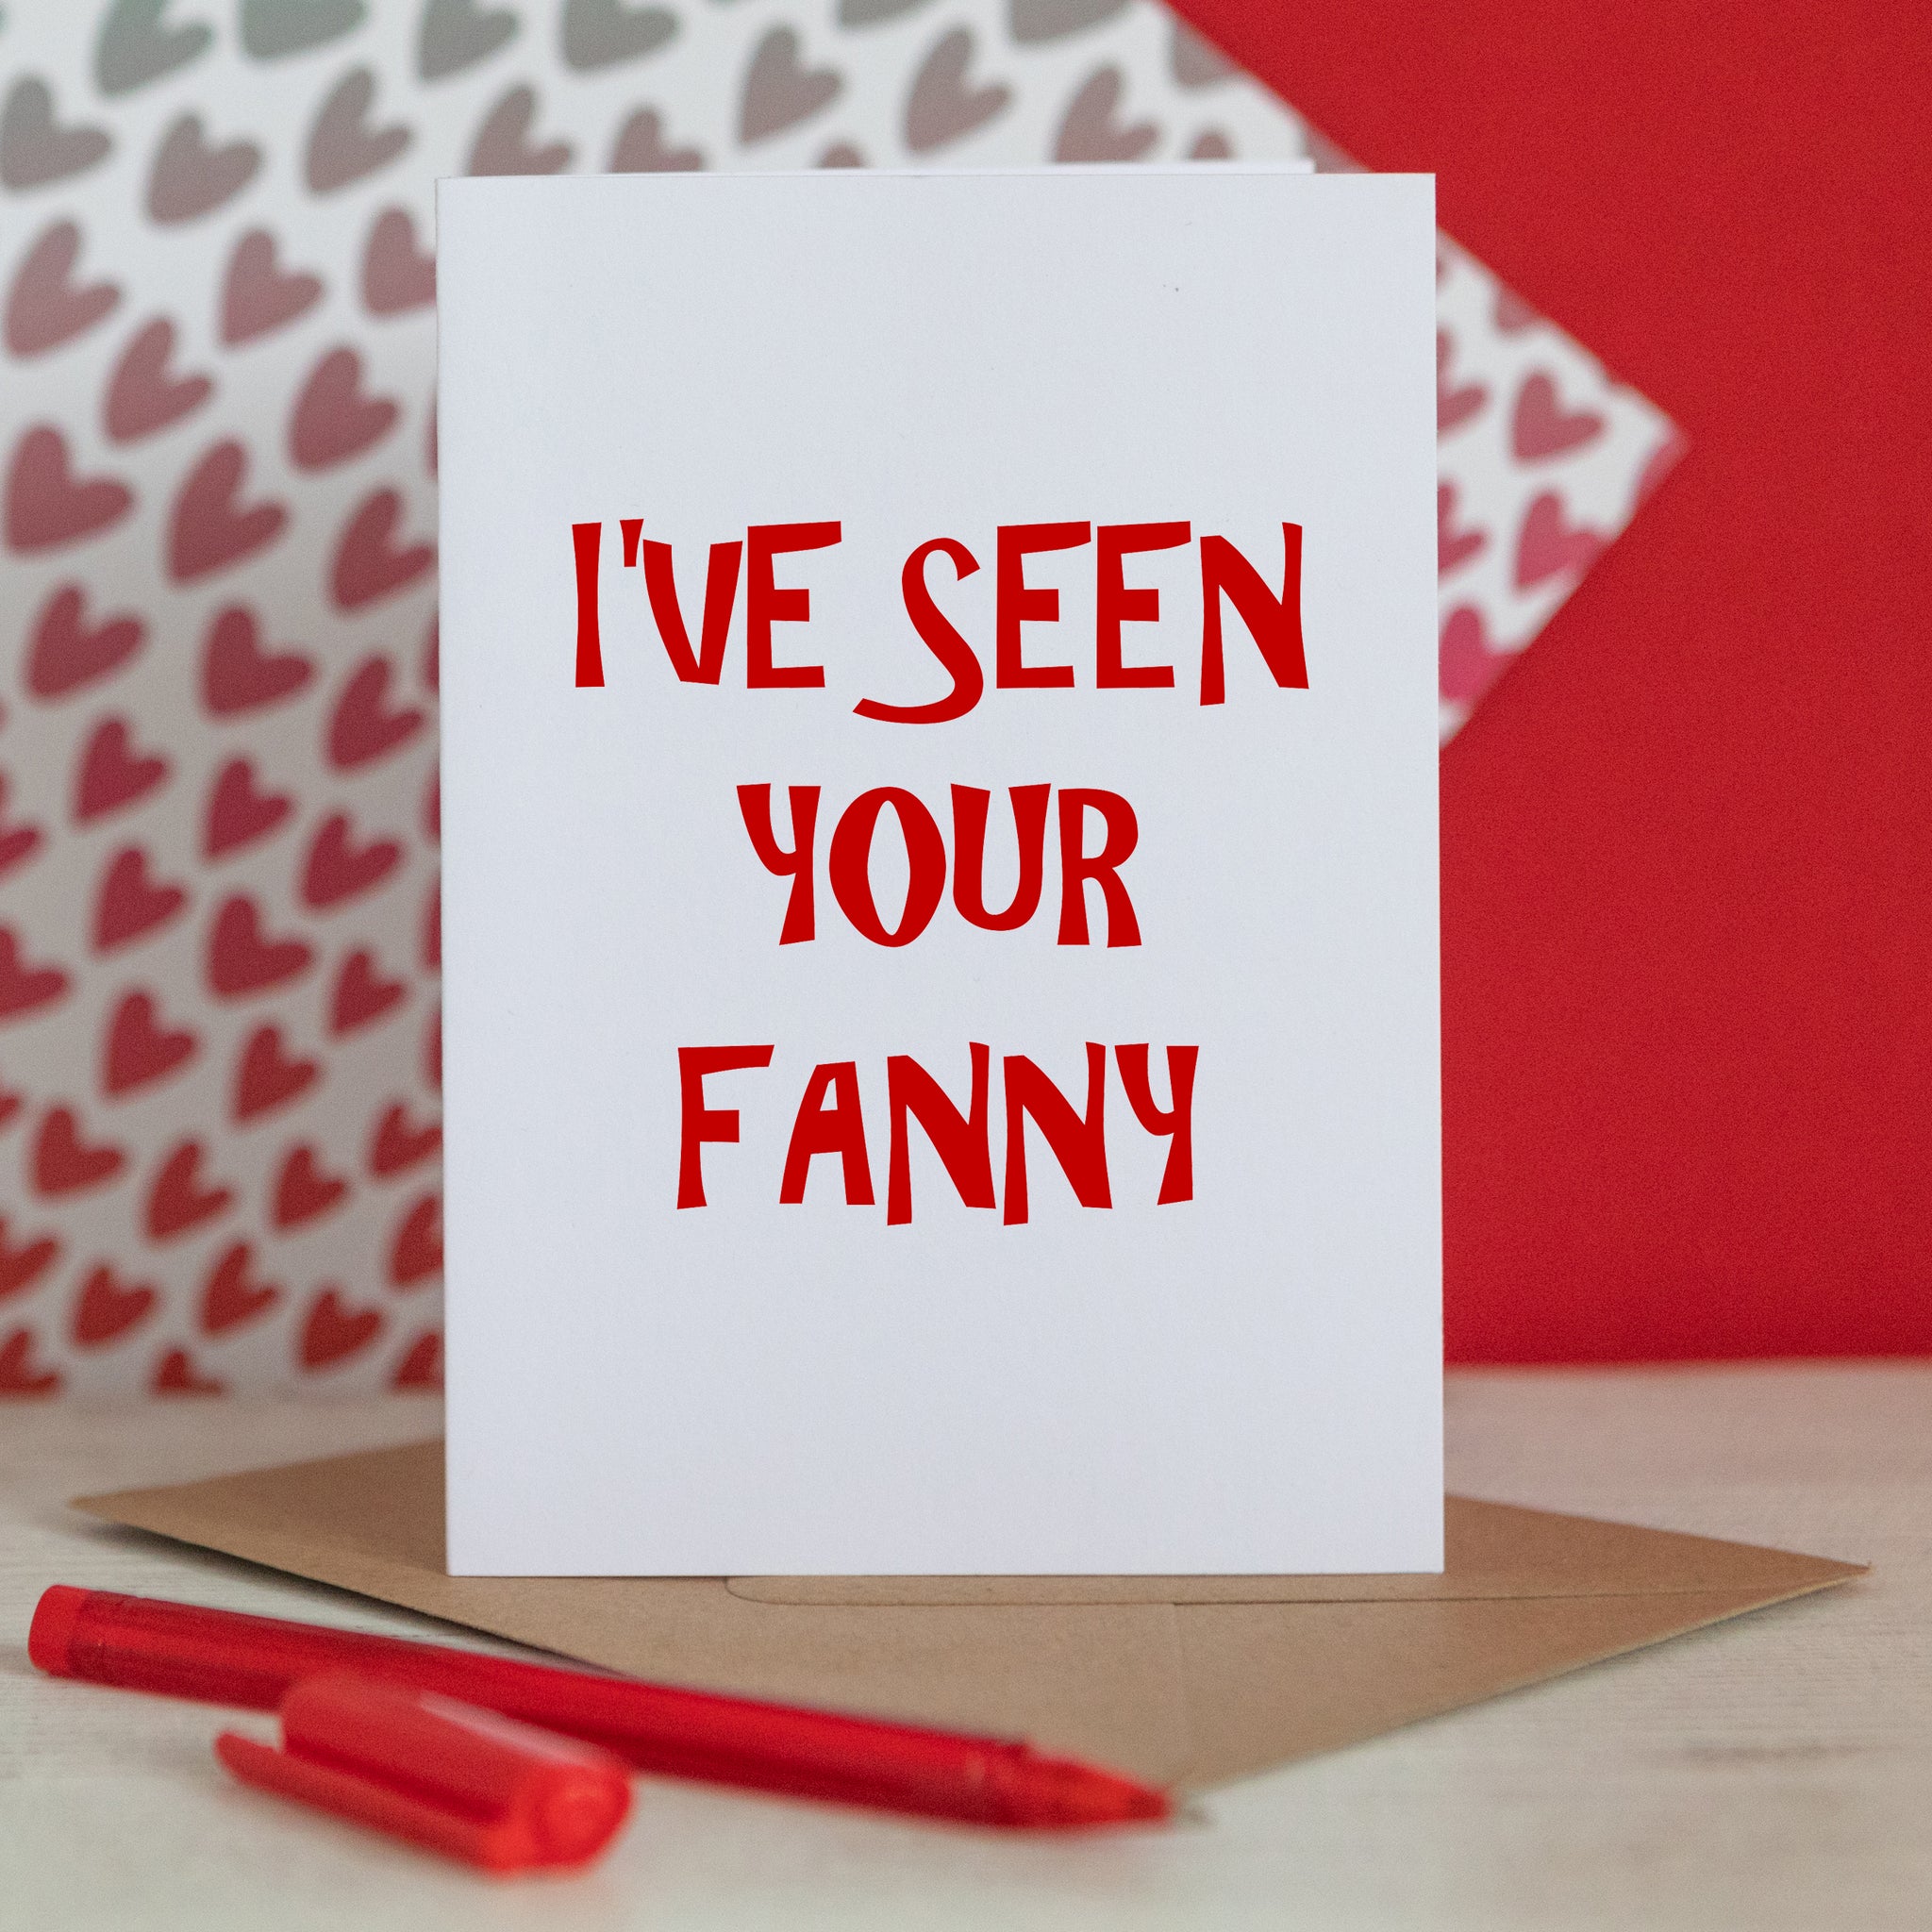 I've seen your fanny